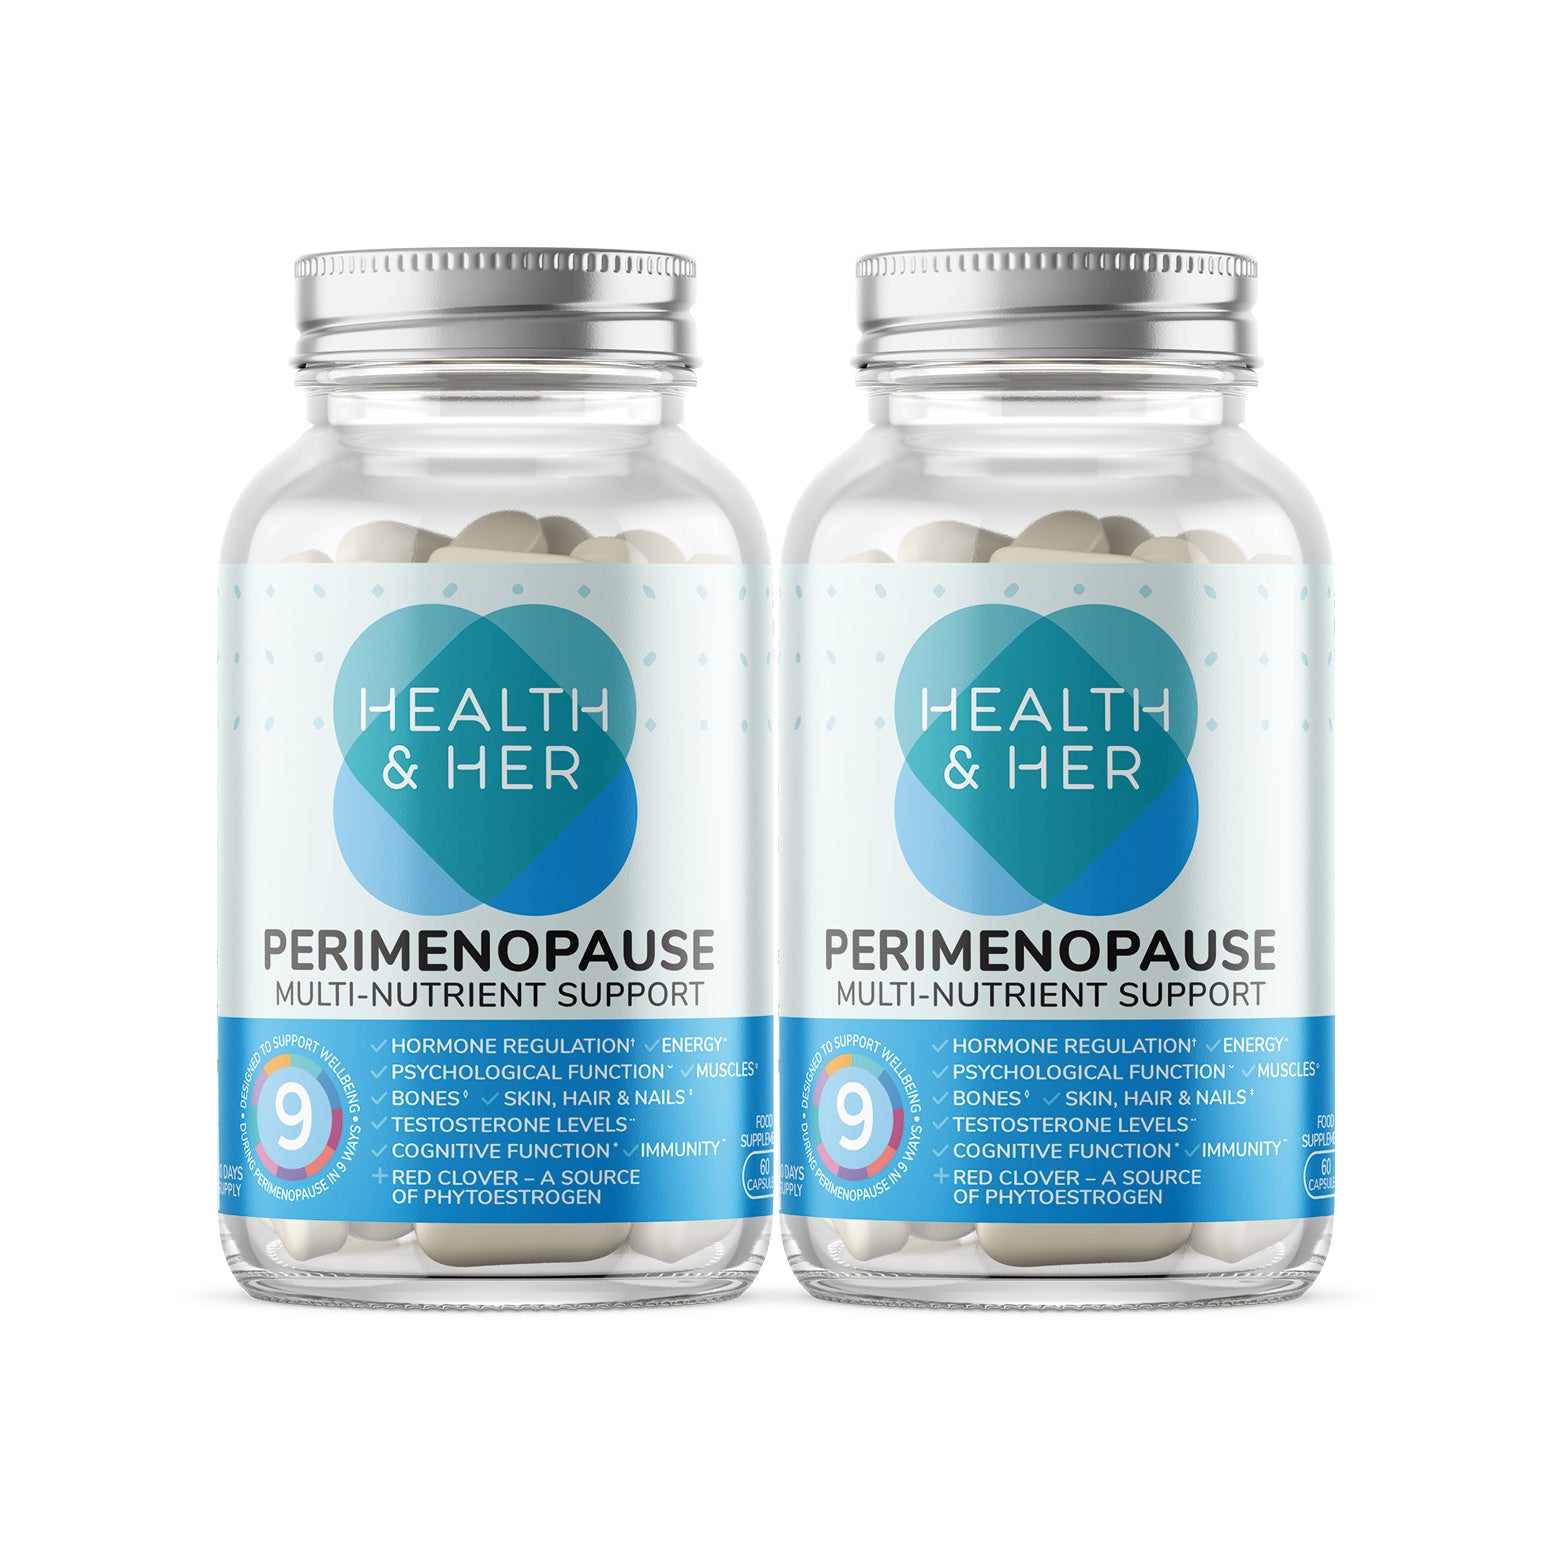 Health & Her Perimenopause Multi-Nutrient Support